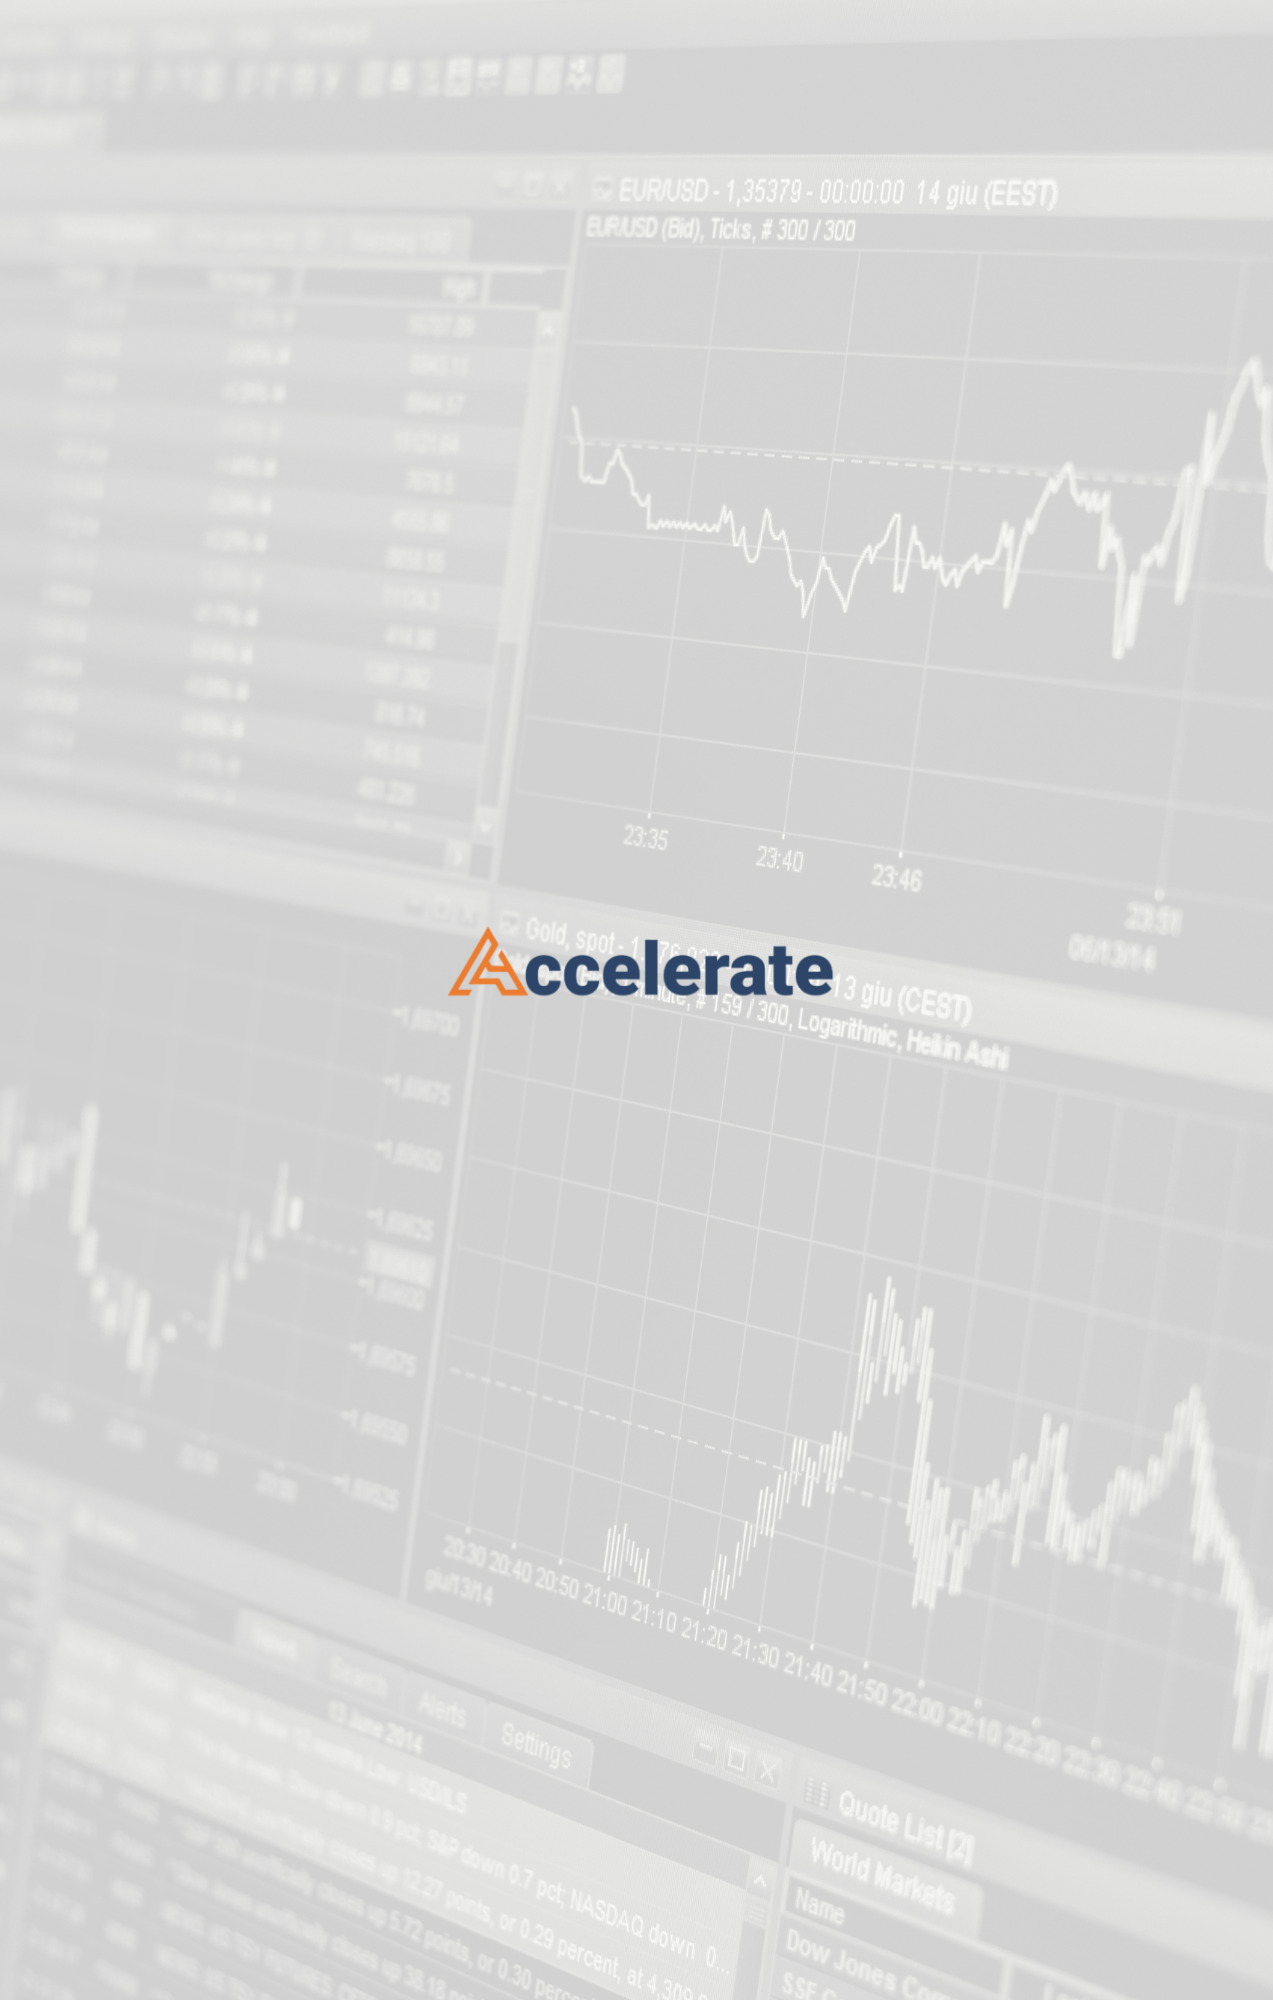 Accelerate Declares Quarterly Distributions, Increases ARB Distribution by 30%